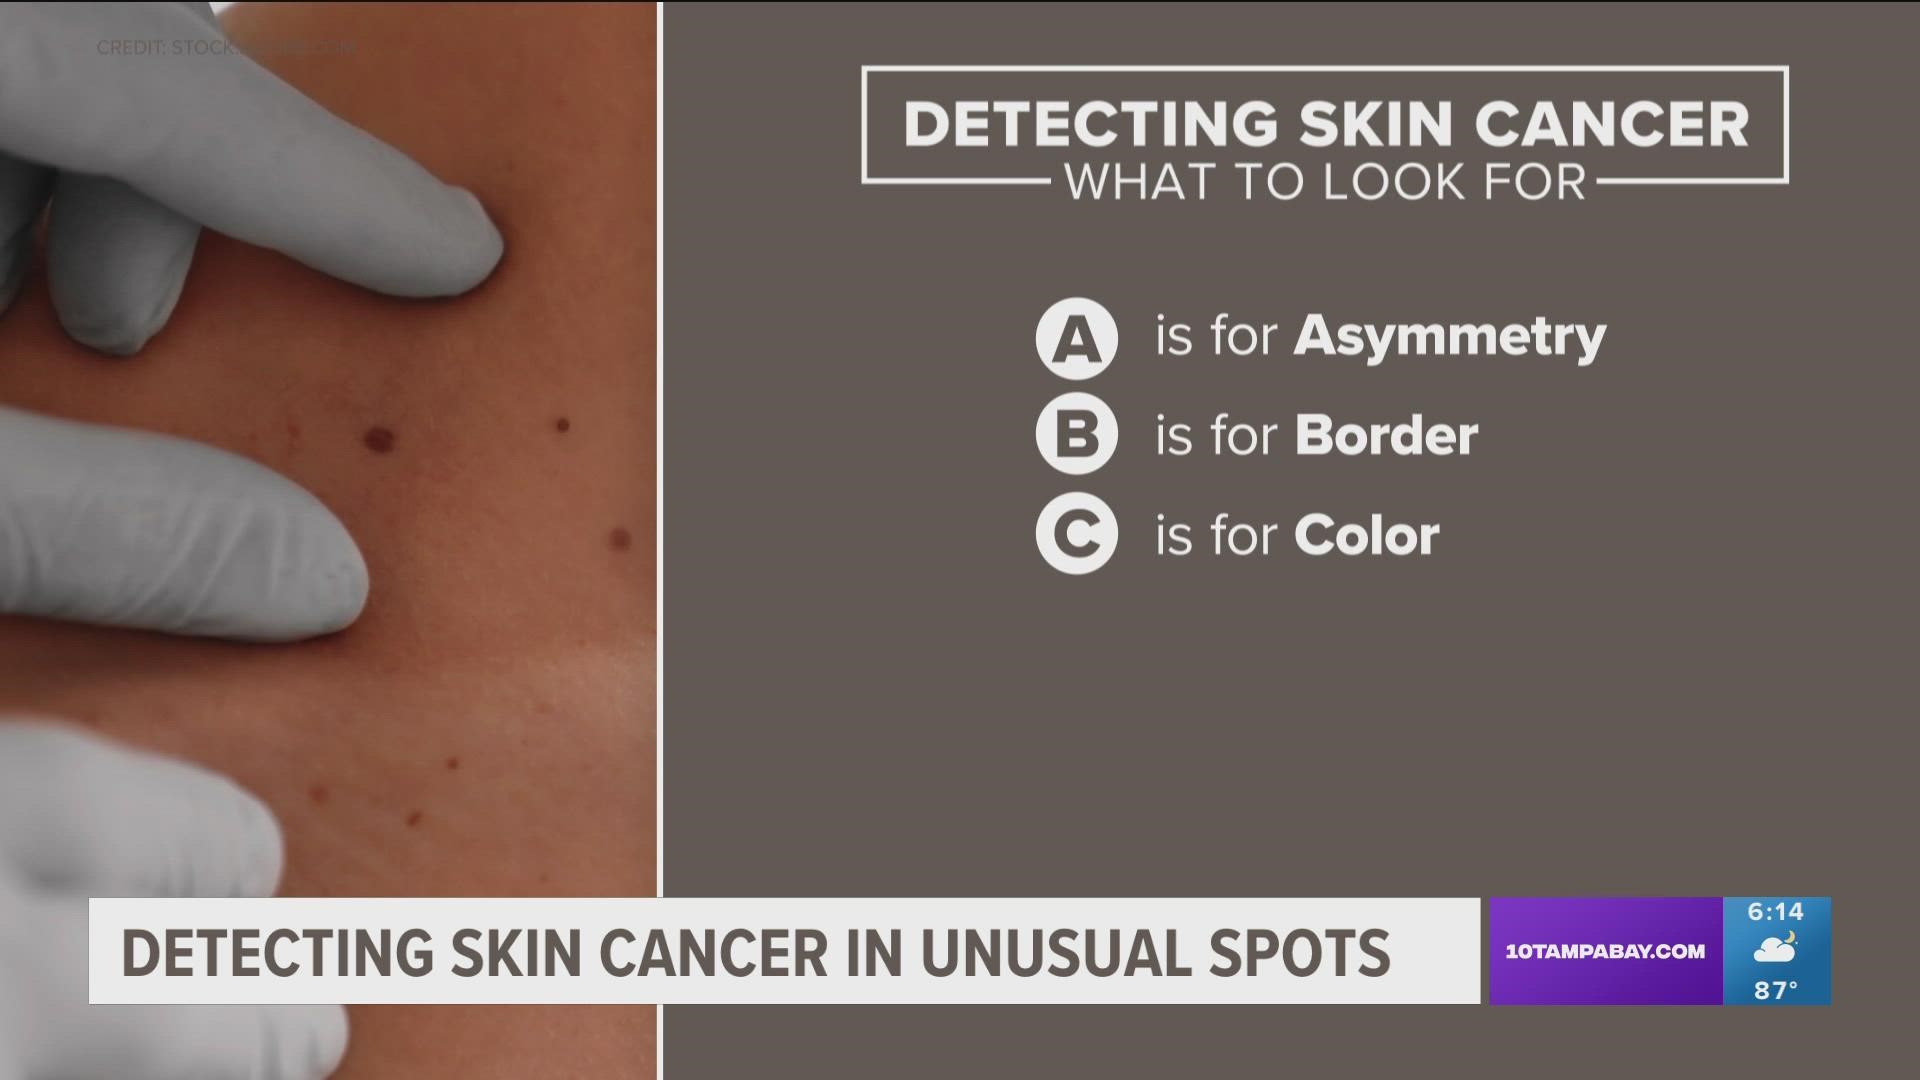 Florida ranks second in the nation for melanoma, the deadliest skin cancer.